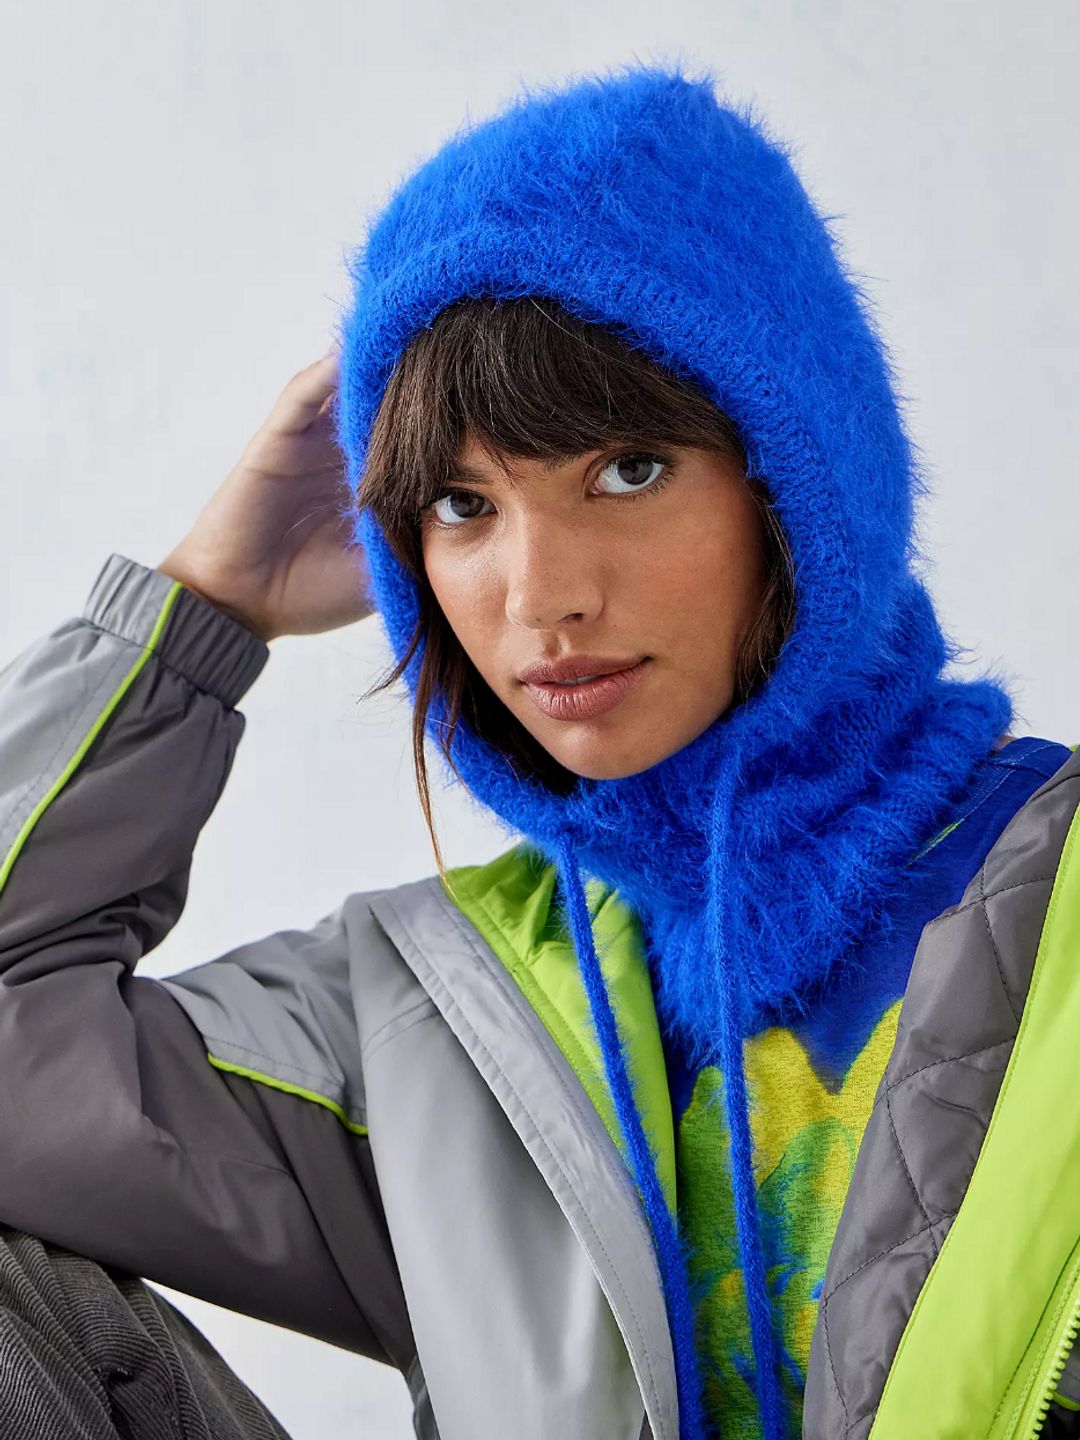 The 10 best balaclavas and hoods for the cold season ahead - shop now